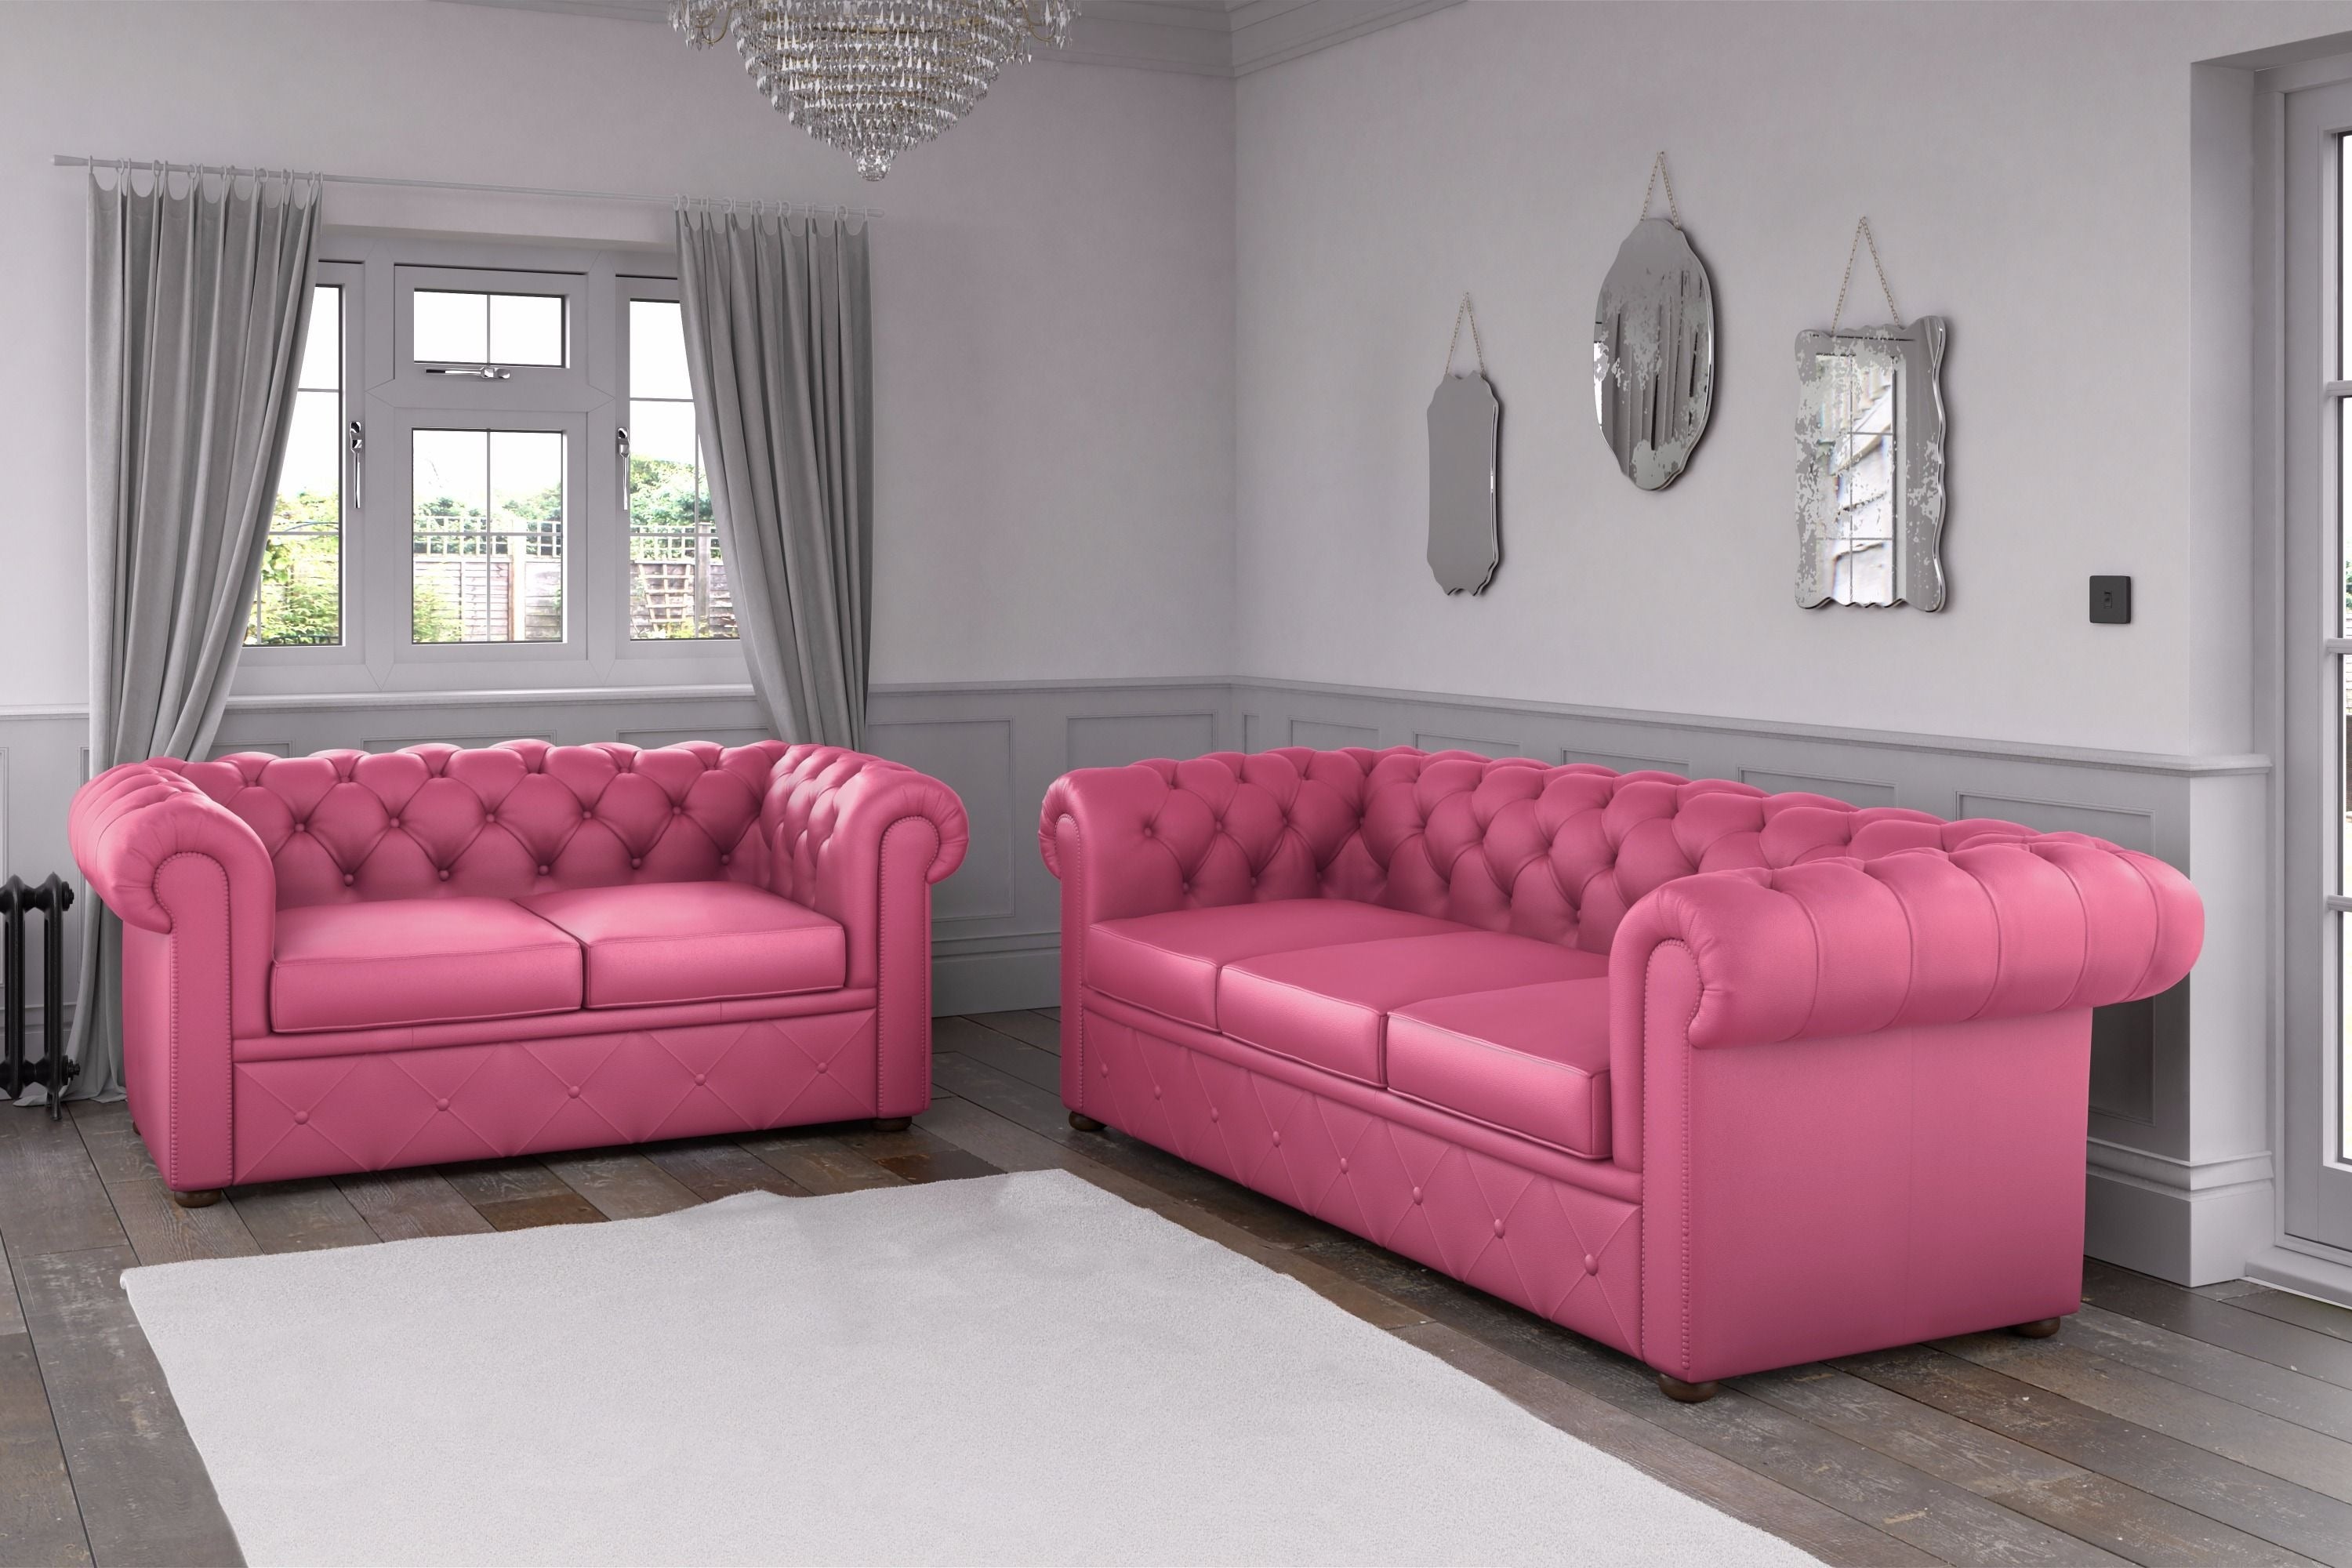 Remarkable Collections Of Pink Living Room Furniture Concept …